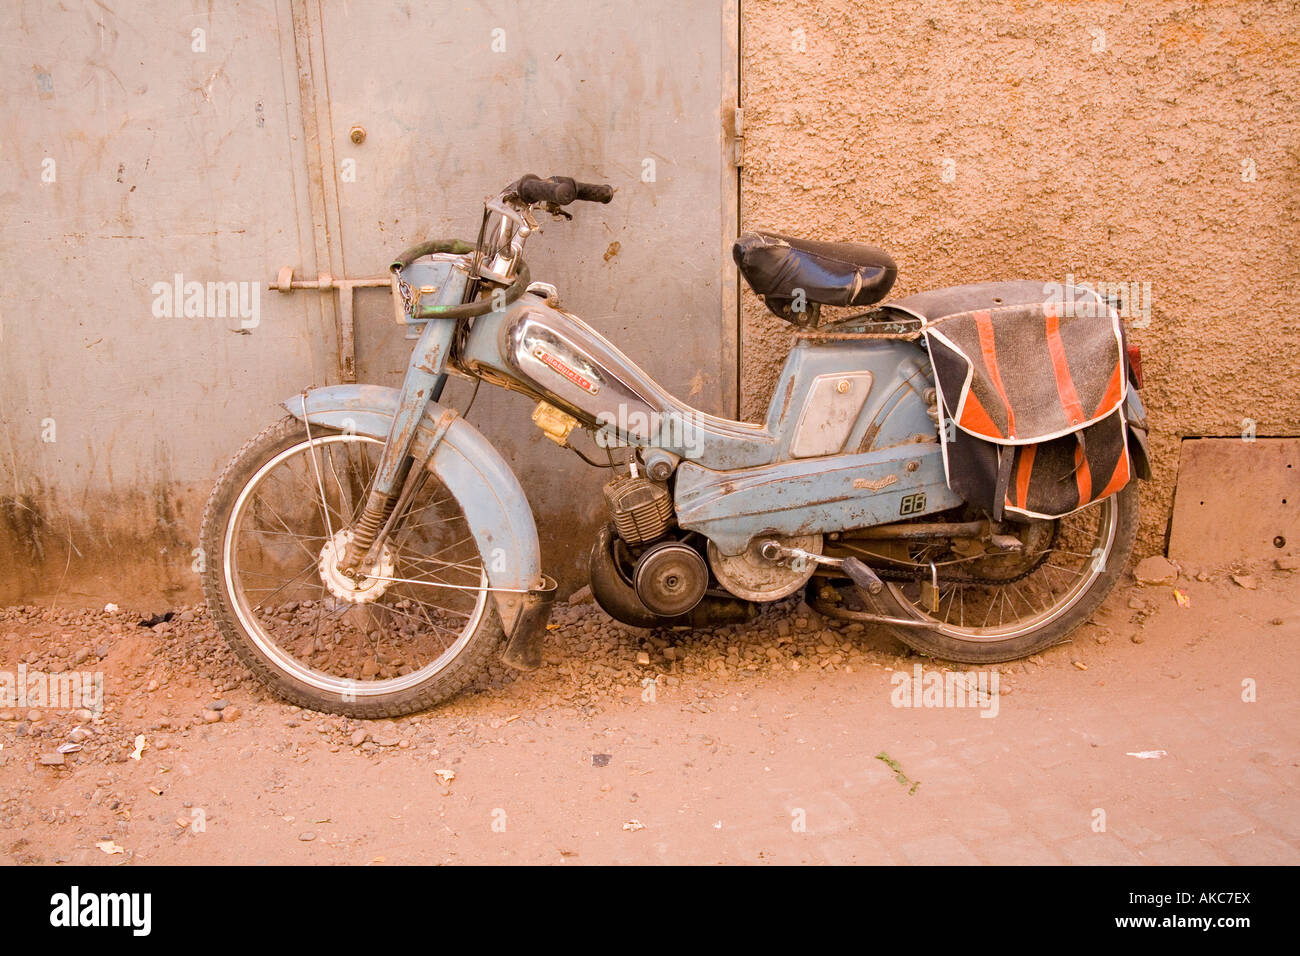 Dusty old scooter or moped in Marrakesh Morocco, North Africa Stock Photo -  Alamy